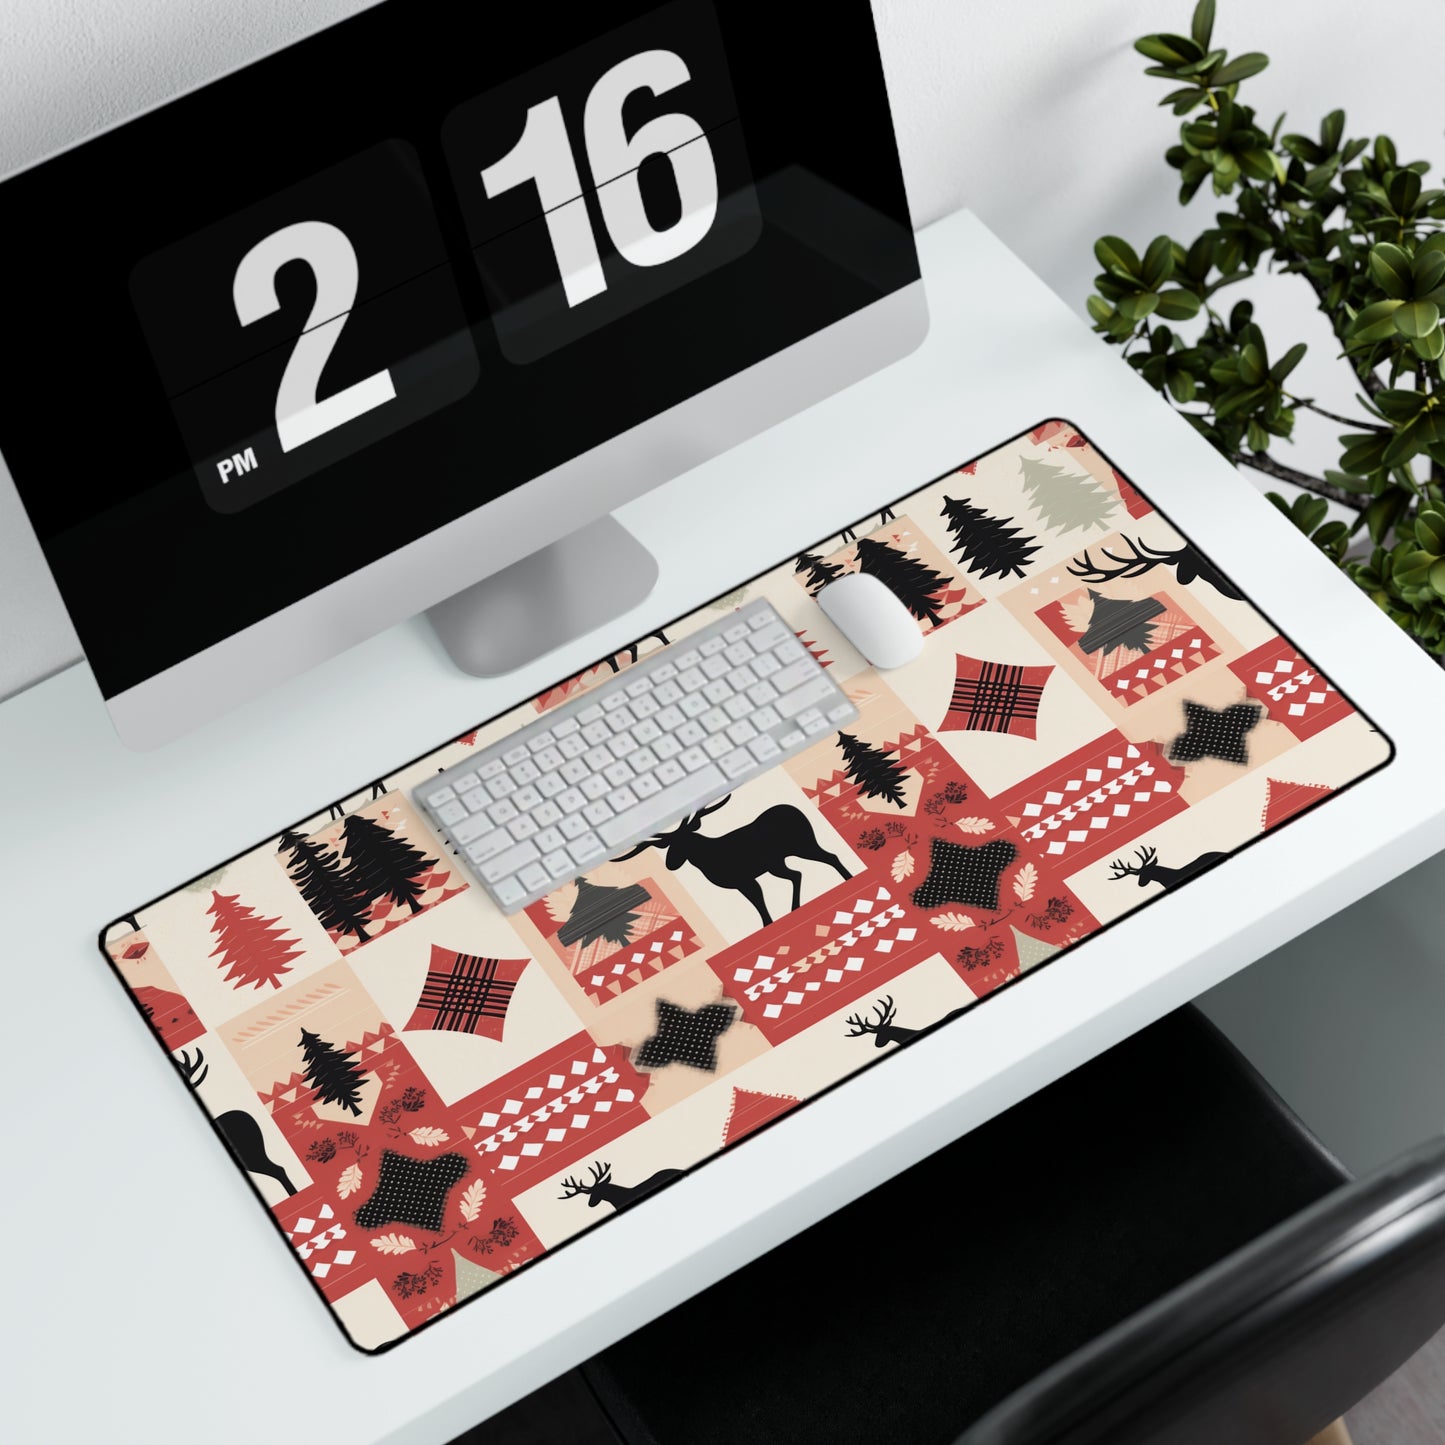 Quilted Look Moose Style Desk Mat | Anti-Fray Durable | High Quality | Sewn Edges | Non-Slip | Supports Optical Mouse | Joyeux Noel